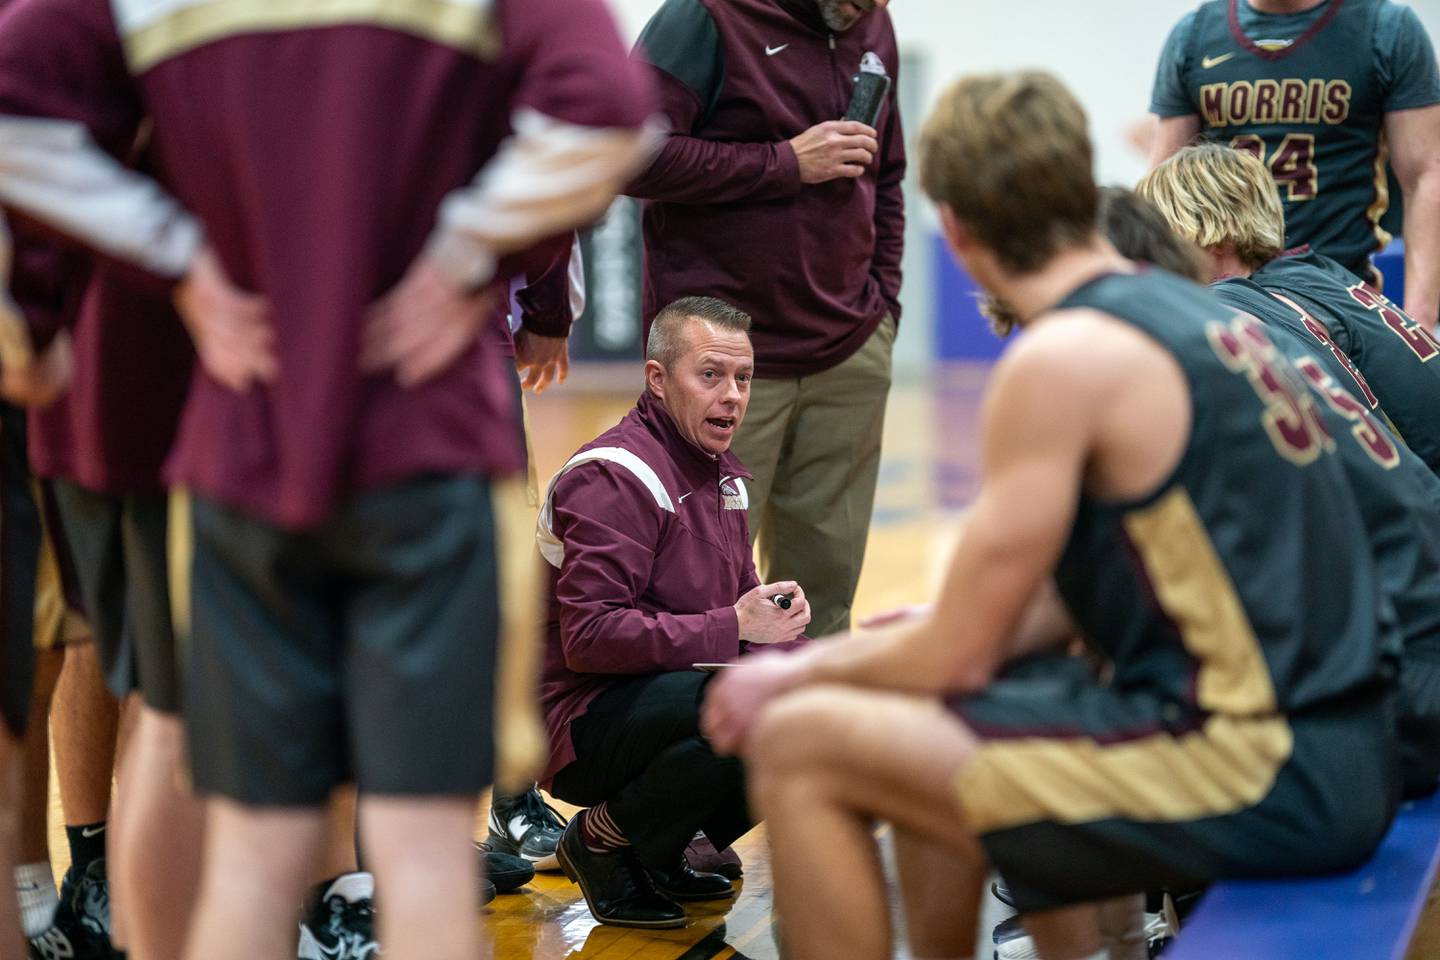 Morris head coach Joe Blumberg talks to his players during a break in play against Marmion during the 59th Annual Plano Christmas Classic basketball tournament at Plano High School on Tuesday, Dec 27, 2022.